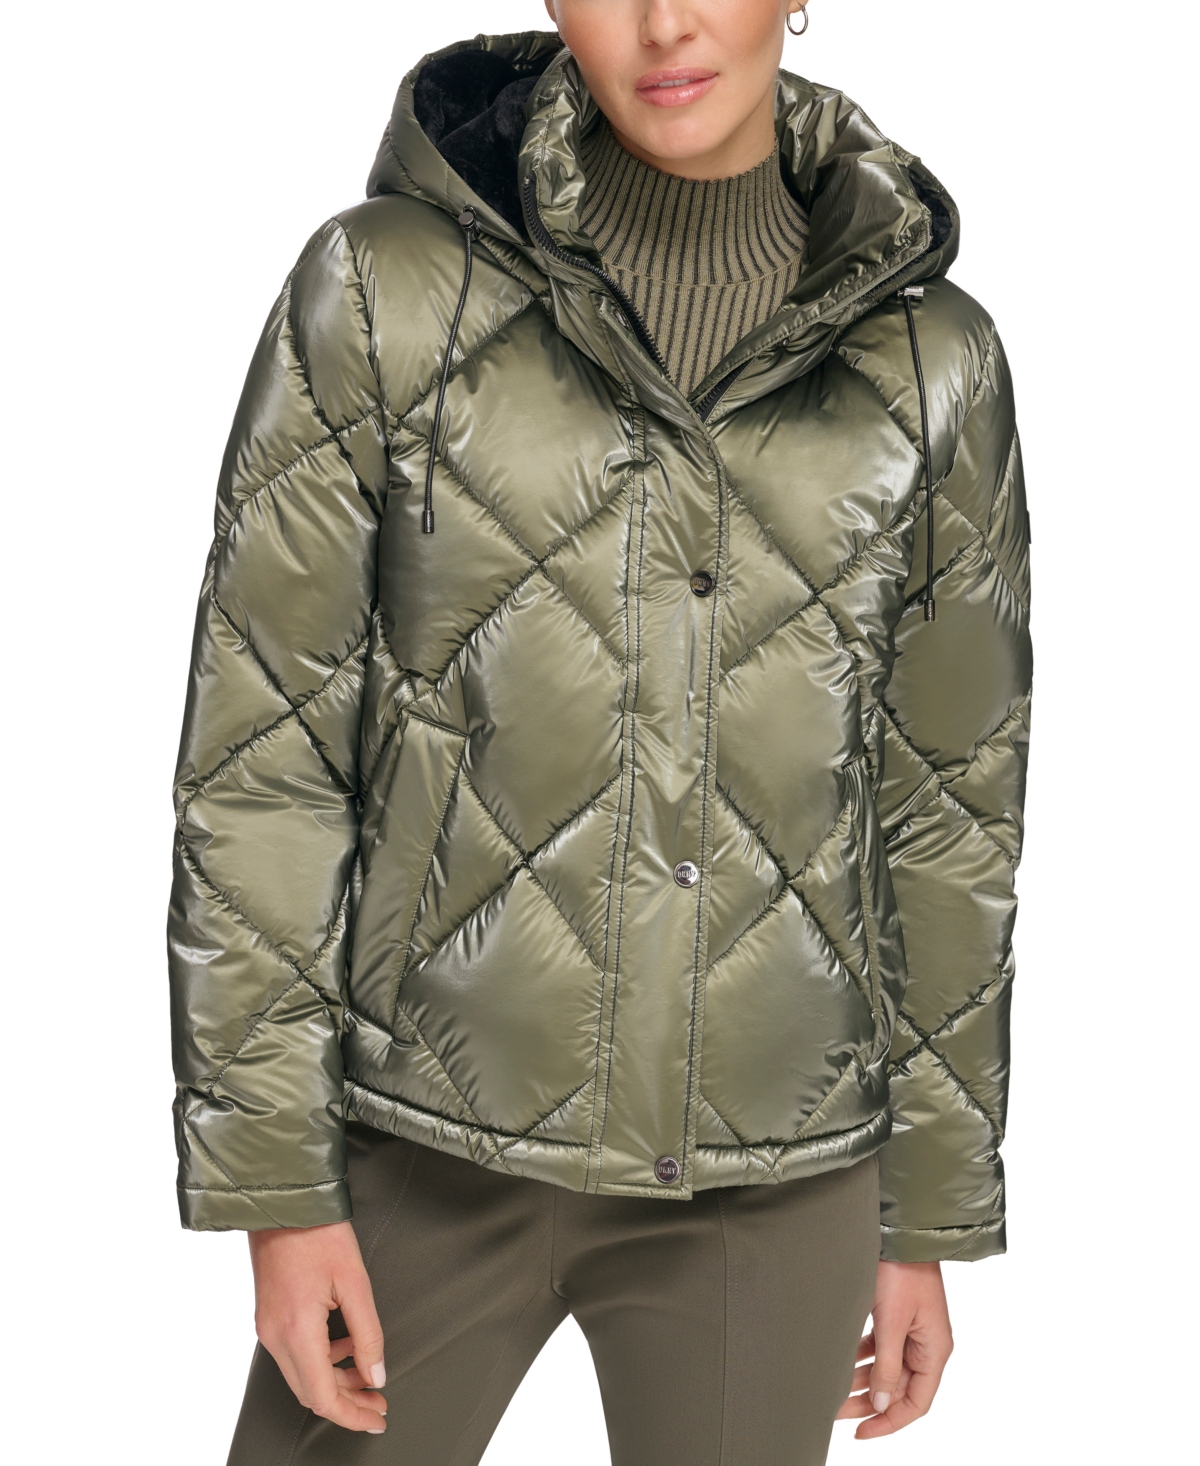 DKNY WOMEN'S DIAMOND QUILTED HOODED PUFFER COAT